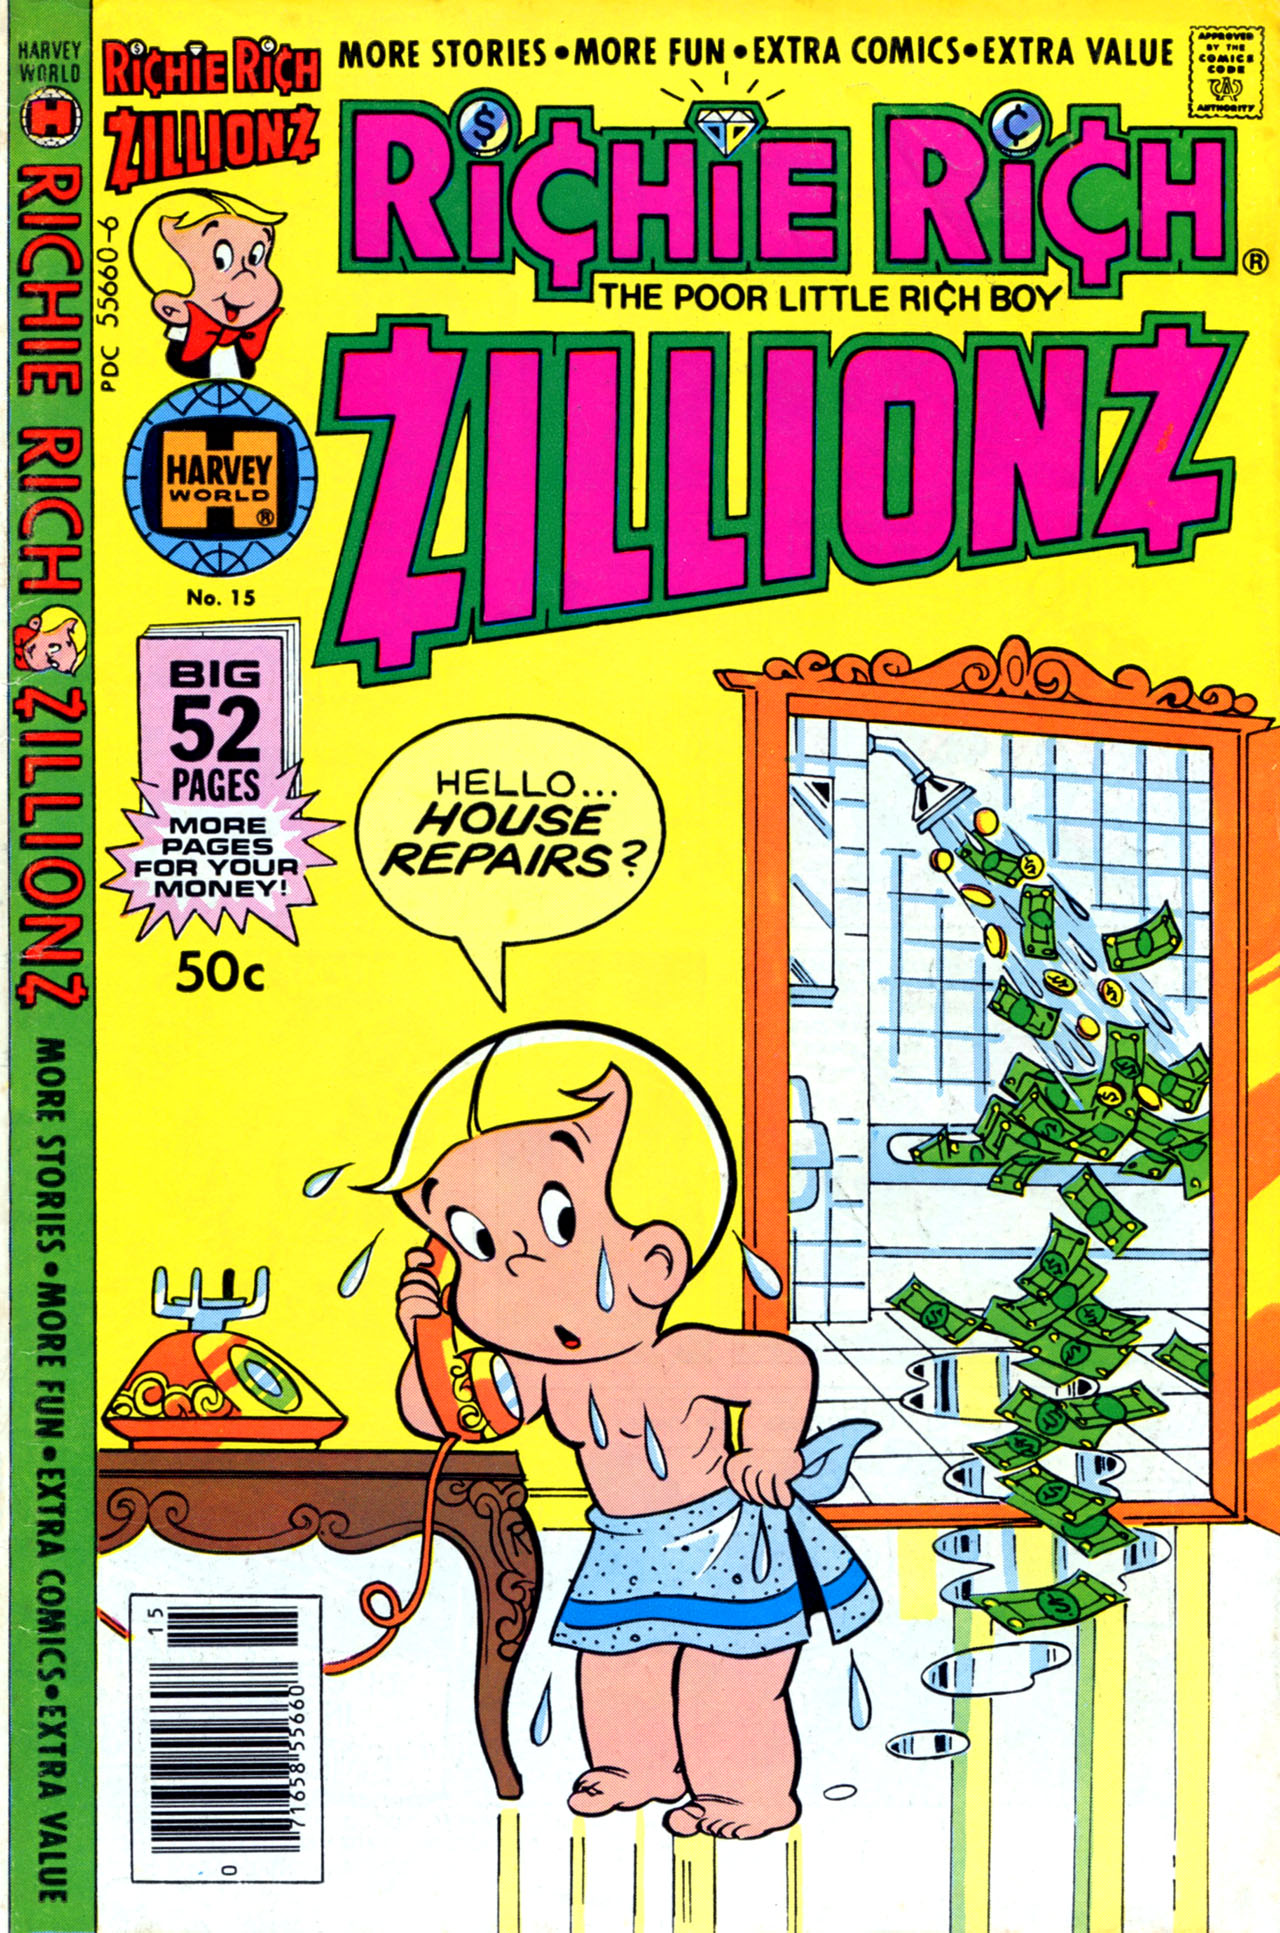 Richie Rich Cartoon Porn - Richie Rich Zillionz Issue 15 | Read Richie Rich Zillionz Issue 15 comic  online in high quality. Read Full Comic online for free - Read comics  online in high quality .| READ COMIC ONLINE